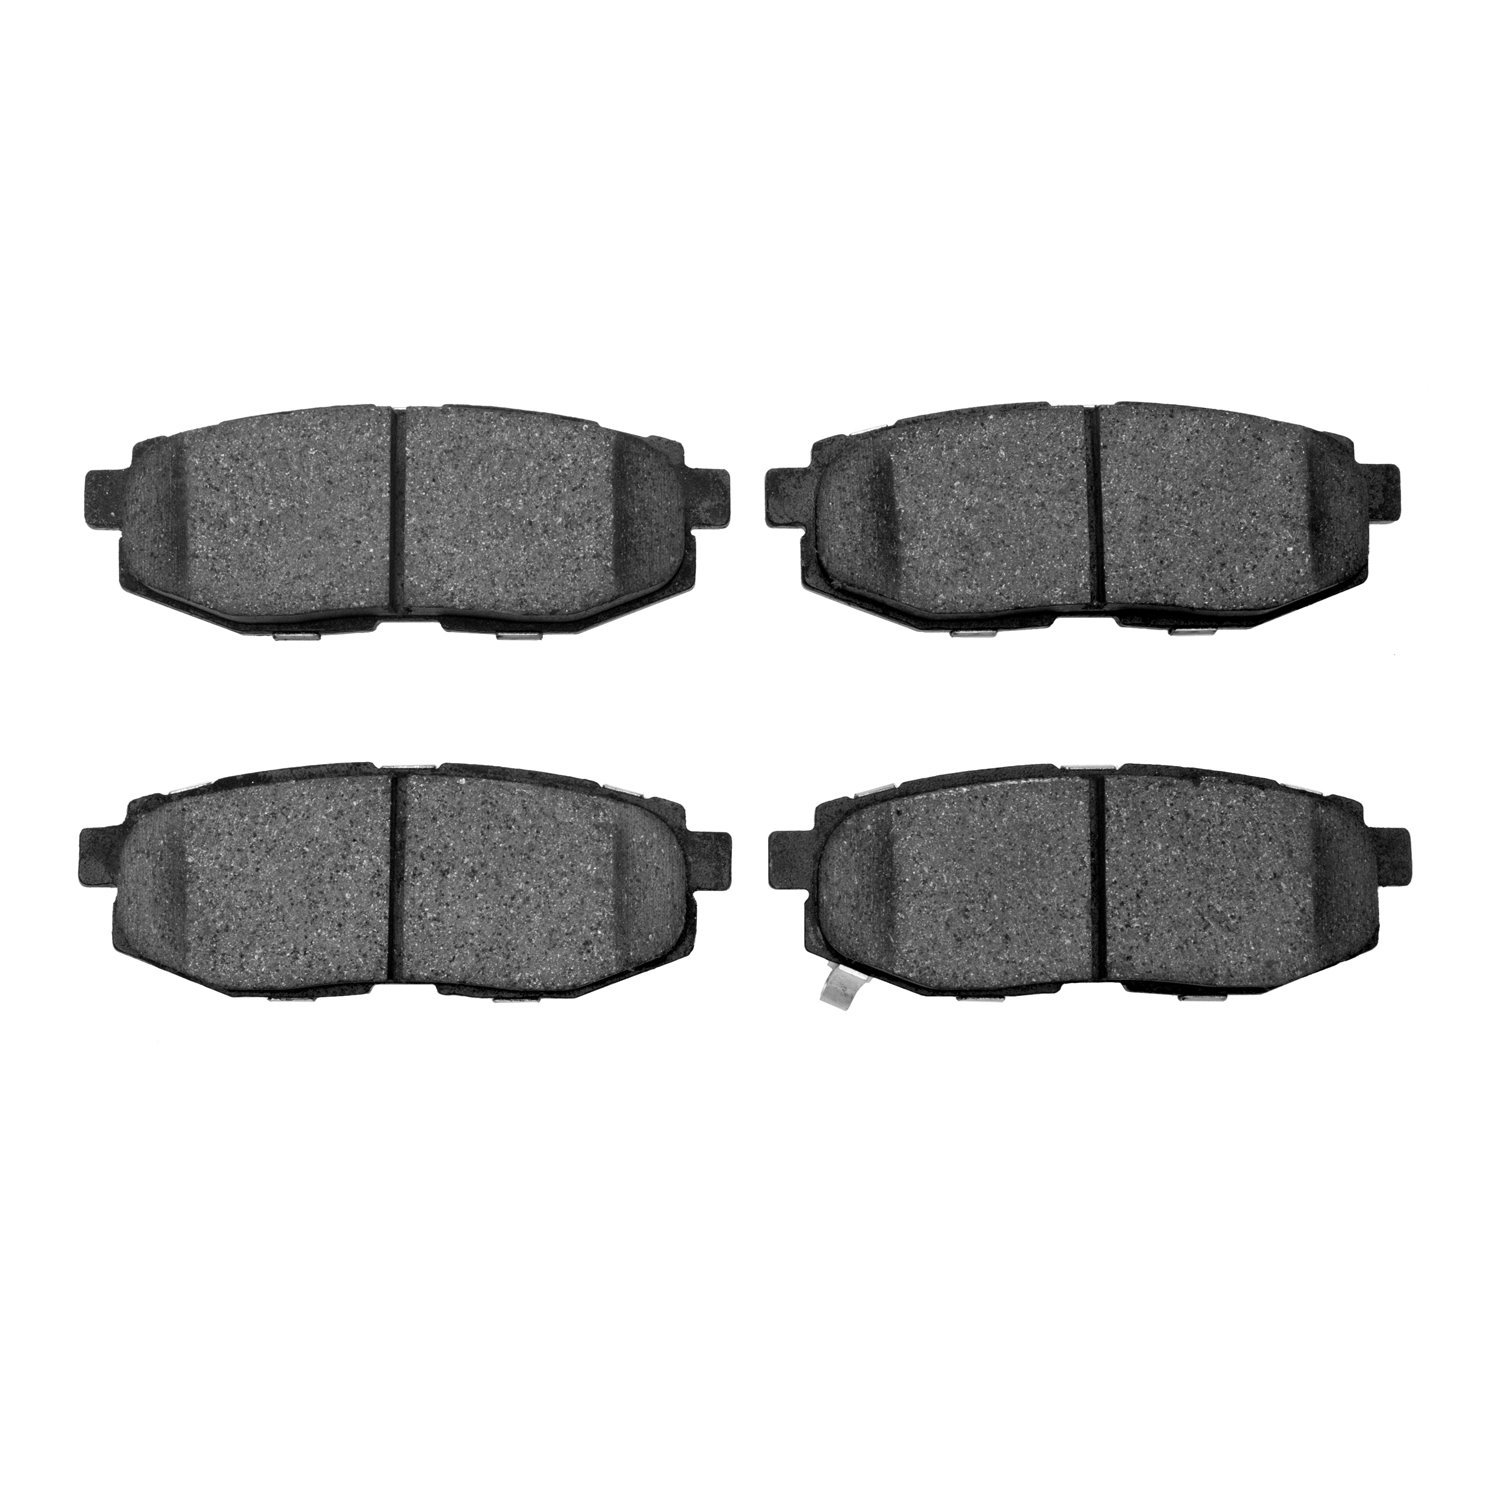 1115-1124-00 Active Performance Low-Metallic Brake Pads, Fits Select Multiple Makes/Models, Position: Rear